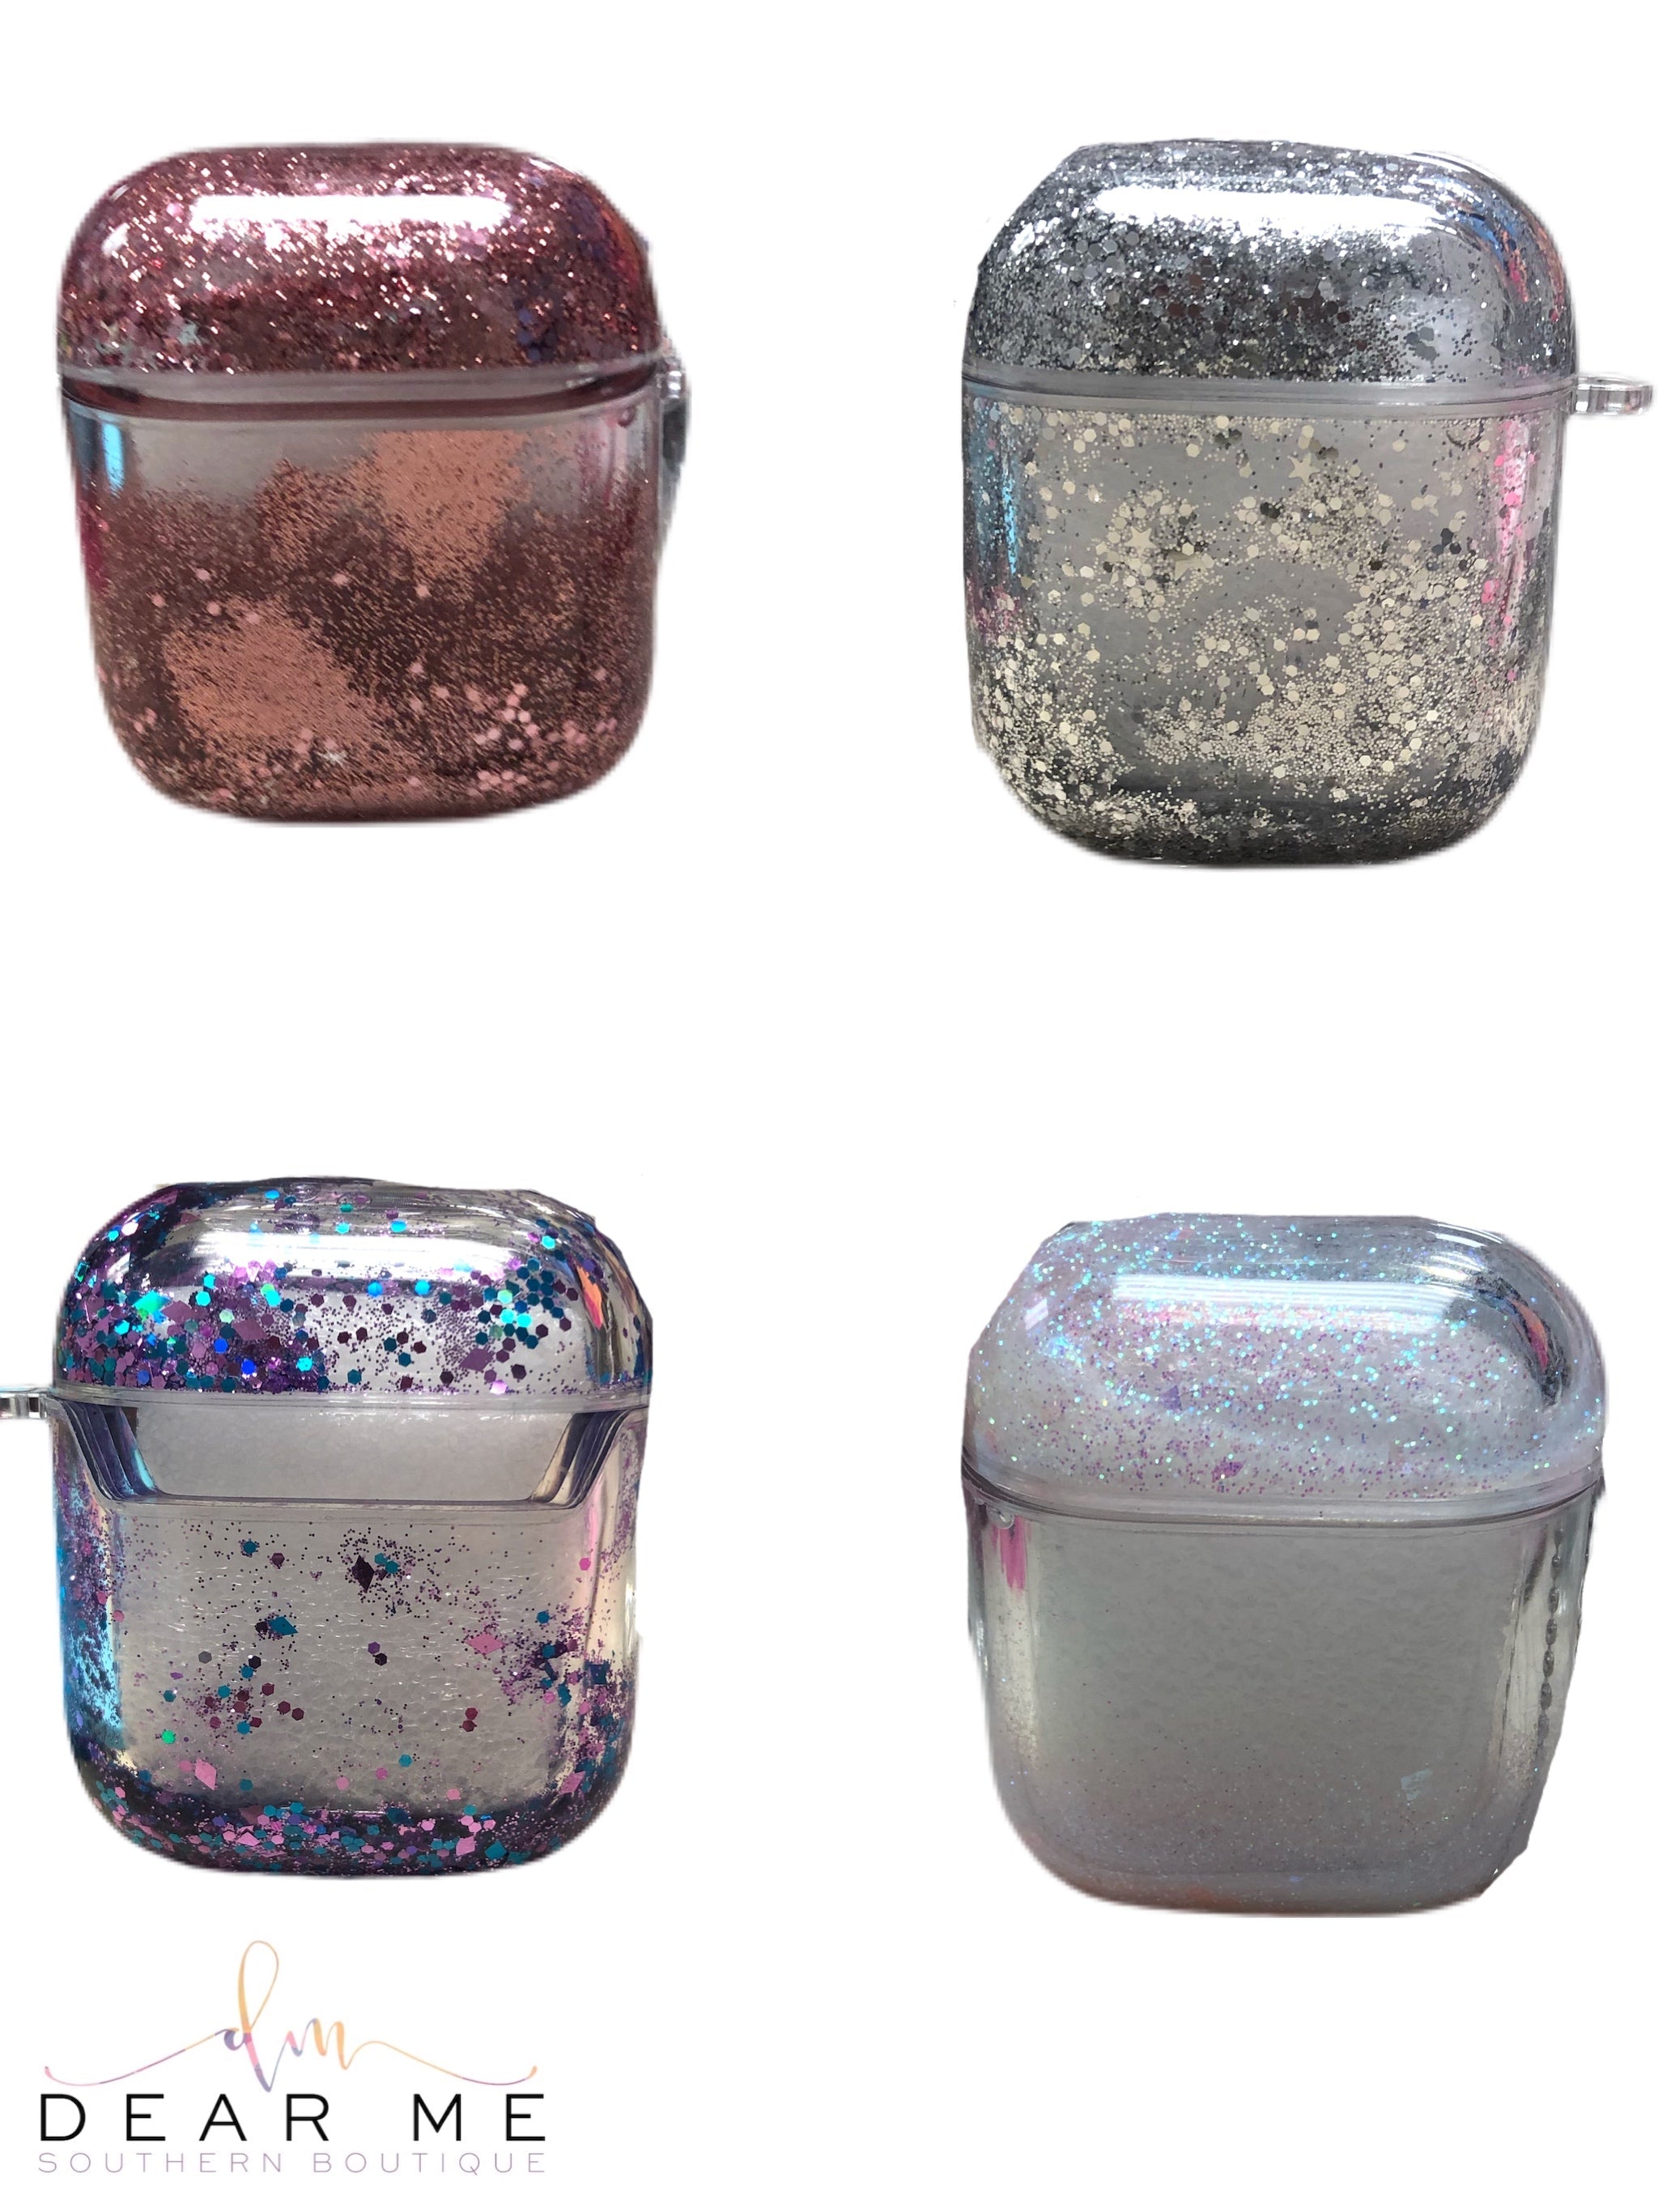 Air Pod Glitter Cases-Dear Me Southern Boutique, located in DeRidder, Louisiana